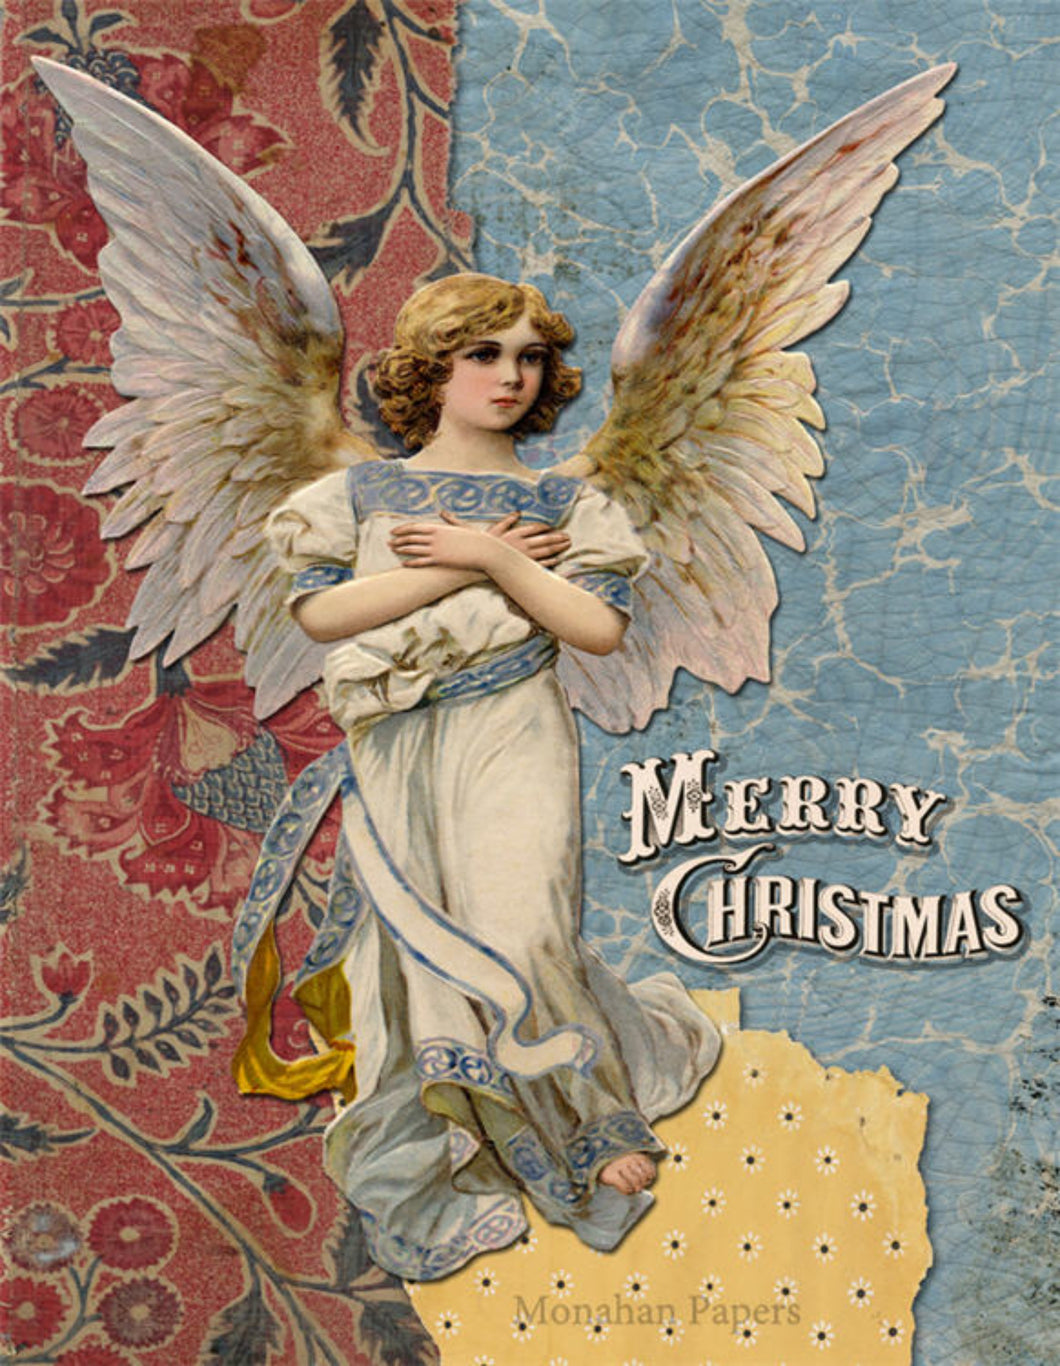 Merry Christmas Angel by Monahan Papers, C340